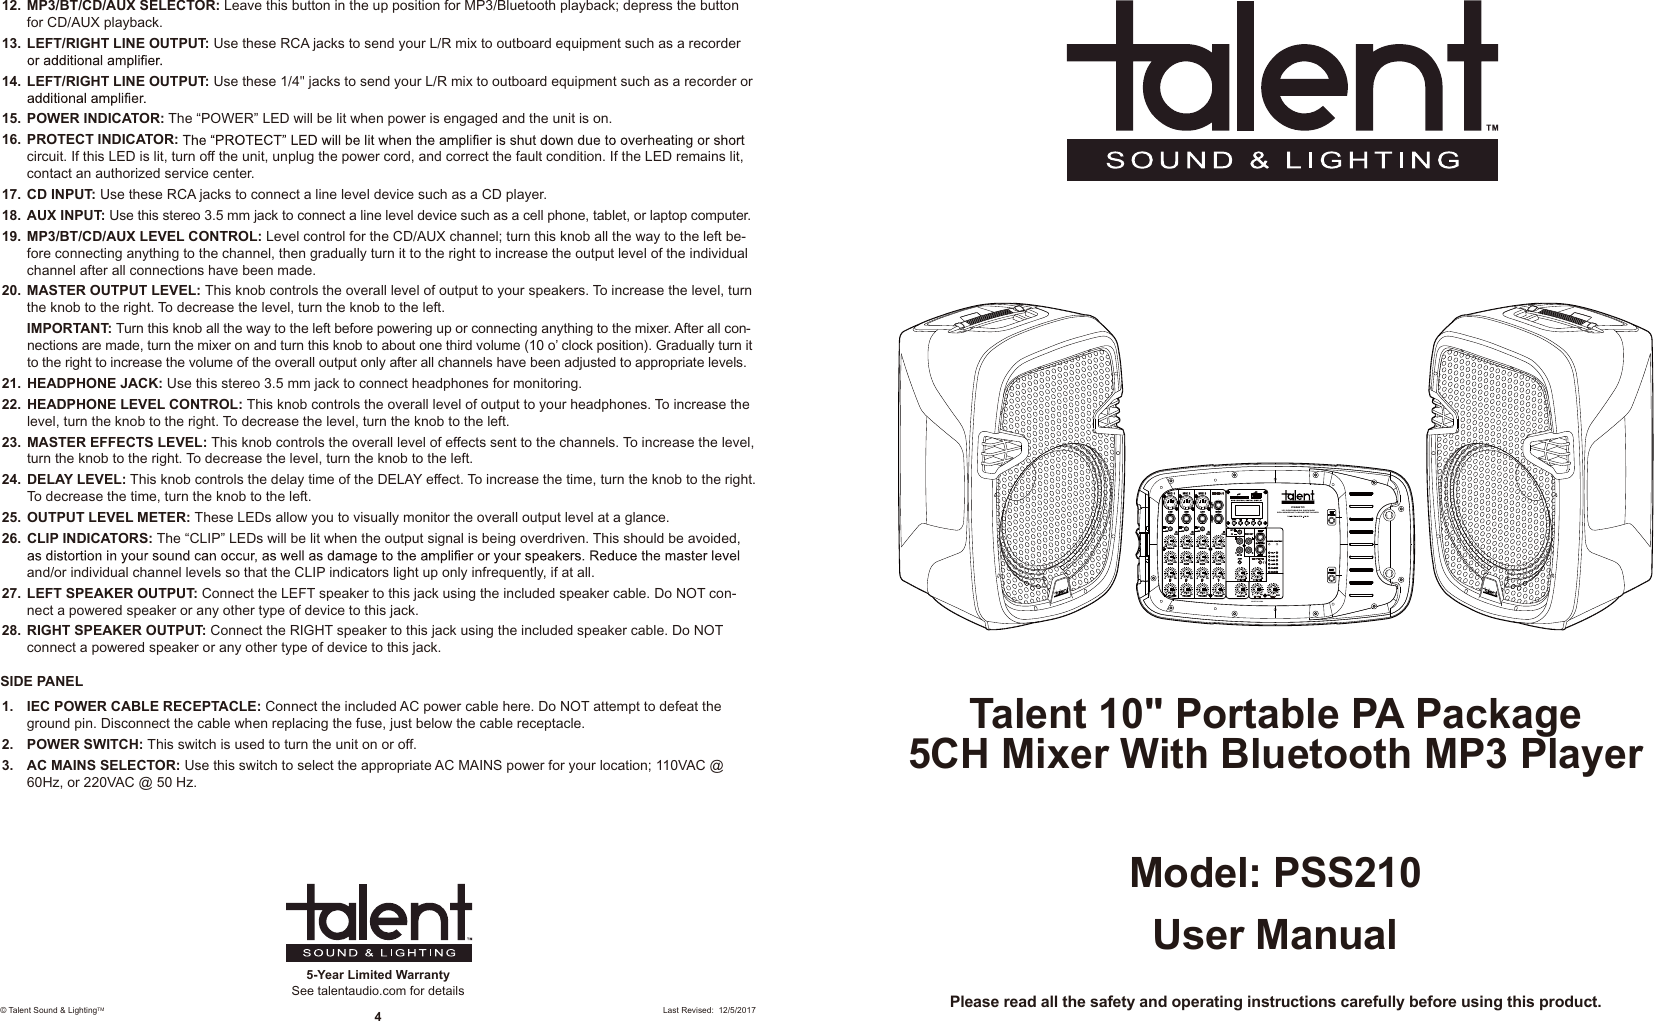 User ManualModel: PSS210Please read all the safety and operating instructions carefully before using this product.Talent 10&quot; Portable PA Package5CH Mixer With Bluetooth MP3 PlayerPSS21010&quot; PORTABLE PA PACKAGE5CH MIXER WITH BLUETOOTH MP3VOLUM E VOLUM EMADE IN CHINADELAYFX VOLFX FX FX FX5-Year Limited WarrantySee talentaudio.com for details© Talent Sound &amp; LightingTM 4Last Revised:  12/5/201712.  MP3/BT/CD/AUX SELECTOR: Leave this button in the up position for MP3/Bluetooth playback; depress the button for CD/AUX playback. 13.  LEFT/RIGHT LINE OUTPUT: Use these RCA jacks to send your L/R mix to outboard equipment such as a recorder 14.  LEFT/RIGHT LINE OUTPUT: Use these 1/4&quot; jacks to send your L/R mix to outboard equipment such as a recorder or 15.  POWER INDICATOR: The “POWER” LED will be lit when power is engaged and the unit is on. 16.  PROTECT INDICATOR:circuit. If this LED is lit, turn off the unit, unplug the power cord, and correct the fault condition. If the LED remains lit, contact an authorized service center.17.  CD INPUT: Use these RCA jacks to connect a line level device such as a CD player.18.  AUX INPUT: Use this stereo 3.5 mm jack to connect a line level device such as a cell phone, tablet, or laptop computer.19.  MP3/BT/CD/AUX LEVEL CONTROL: Level control for the CD/AUX channel; turn this knob all the way to the left be-fore connecting anything to the channel, then gradually turn it to the right to increase the output level of the individual channel after all connections have been made.20.  MASTER OUTPUT LEVEL: This knob controls the overall level of output to your speakers. To increase the level, turn the knob to the right. To decrease the level, turn the knob to the left. IMPORTANT: Turn this knob all the way to the left before powering up or connecting anything to the mixer. After all con-nections are made, turn the mixer on and turn this knob to about one third volume (10 o’ clock position). Gradually turn it to the right to increase the volume of the overall output only after all channels have been adjusted to appropriate levels.21.  HEADPHONE JACK: Use this stereo 3.5 mm jack to connect headphones for monitoring.22.  HEADPHONE LEVEL CONTROL: This knob controls the overall level of output to your headphones. To increase the level, turn the knob to the right. To decrease the level, turn the knob to the left.23.  MASTER EFFECTS LEVEL: This knob controls the overall level of effects sent to the channels. To increase the level, turn the knob to the right. To decrease the level, turn the knob to the left.24.  DELAY LEVEL: This knob controls the delay time of the DELAY effect. To increase the time, turn the knob to the right. To decrease the time, turn the knob to the left.25.  OUTPUT LEVEL METER: These LEDs allow you to visually monitor the overall output level at a glance. 26.  CLIP INDICATORS: The “CLIP” LEDs will be lit when the output signal is being overdriven. This should be avoided, and/or individual channel levels so that the CLIP indicators light up only infrequently, if at all.27.  LEFT SPEAKER OUTPUT: Connect the LEFT speaker to this jack using the included speaker cable. Do NOT con-nect a powered speaker or any other type of device to this jack. 28.  RIGHT SPEAKER OUTPUT: Connect the RIGHT speaker to this jack using the included speaker cable. Do NOT connect a powered speaker or any other type of device to this jack.SIDE PANEL1.  IEC POWER CABLE RECEPTACLE: Connect the included AC power cable here. Do NOT attempt to defeat the ground pin. Disconnect the cable when replacing the fuse, just below the cable receptacle.2.  POWER SWITCH: This switch is used to turn the unit on or off.  3.  AC MAINS SELECTOR: Use this switch to select the appropriate AC MAINS power for your location; 110VAC @ 60Hz, or 220VAC @ 50 Hz.